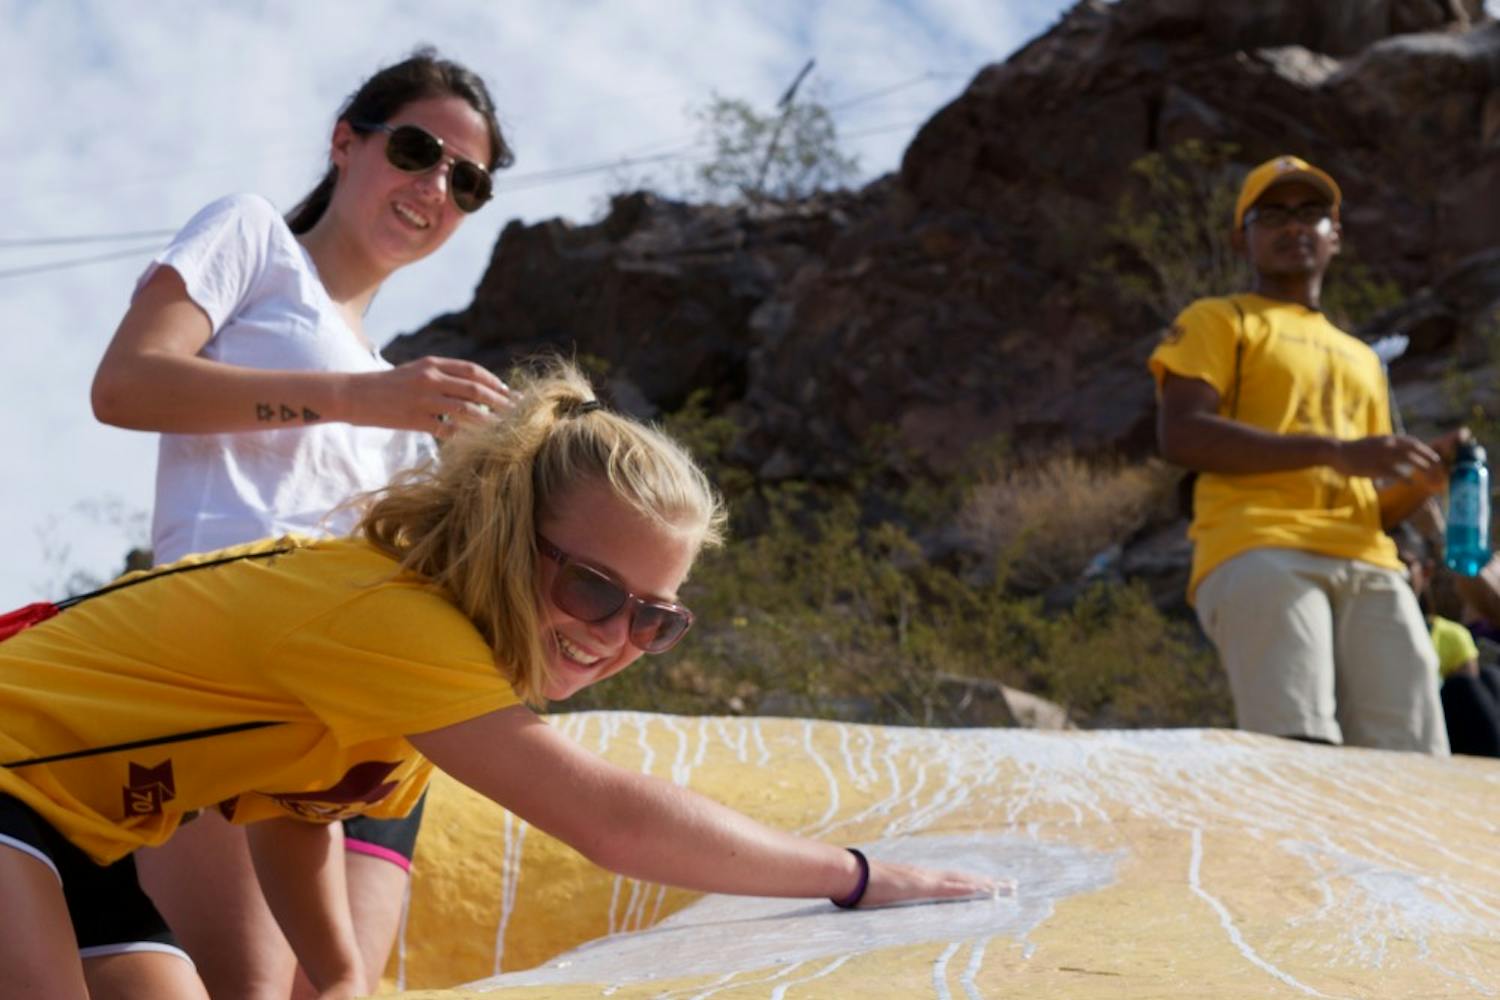 Freshman speech and hearing science major Amanda Mael and freshman art and education major Liz Wagstaff add their cups of paint to the A on Hayden Butte, also known as A Mountain, in Tempe, Arizona, on Aug. 20, 2016. Hundreds of students hike the mountain every fall to add a fresh coat of white paint to the A that sits on the hillside. 